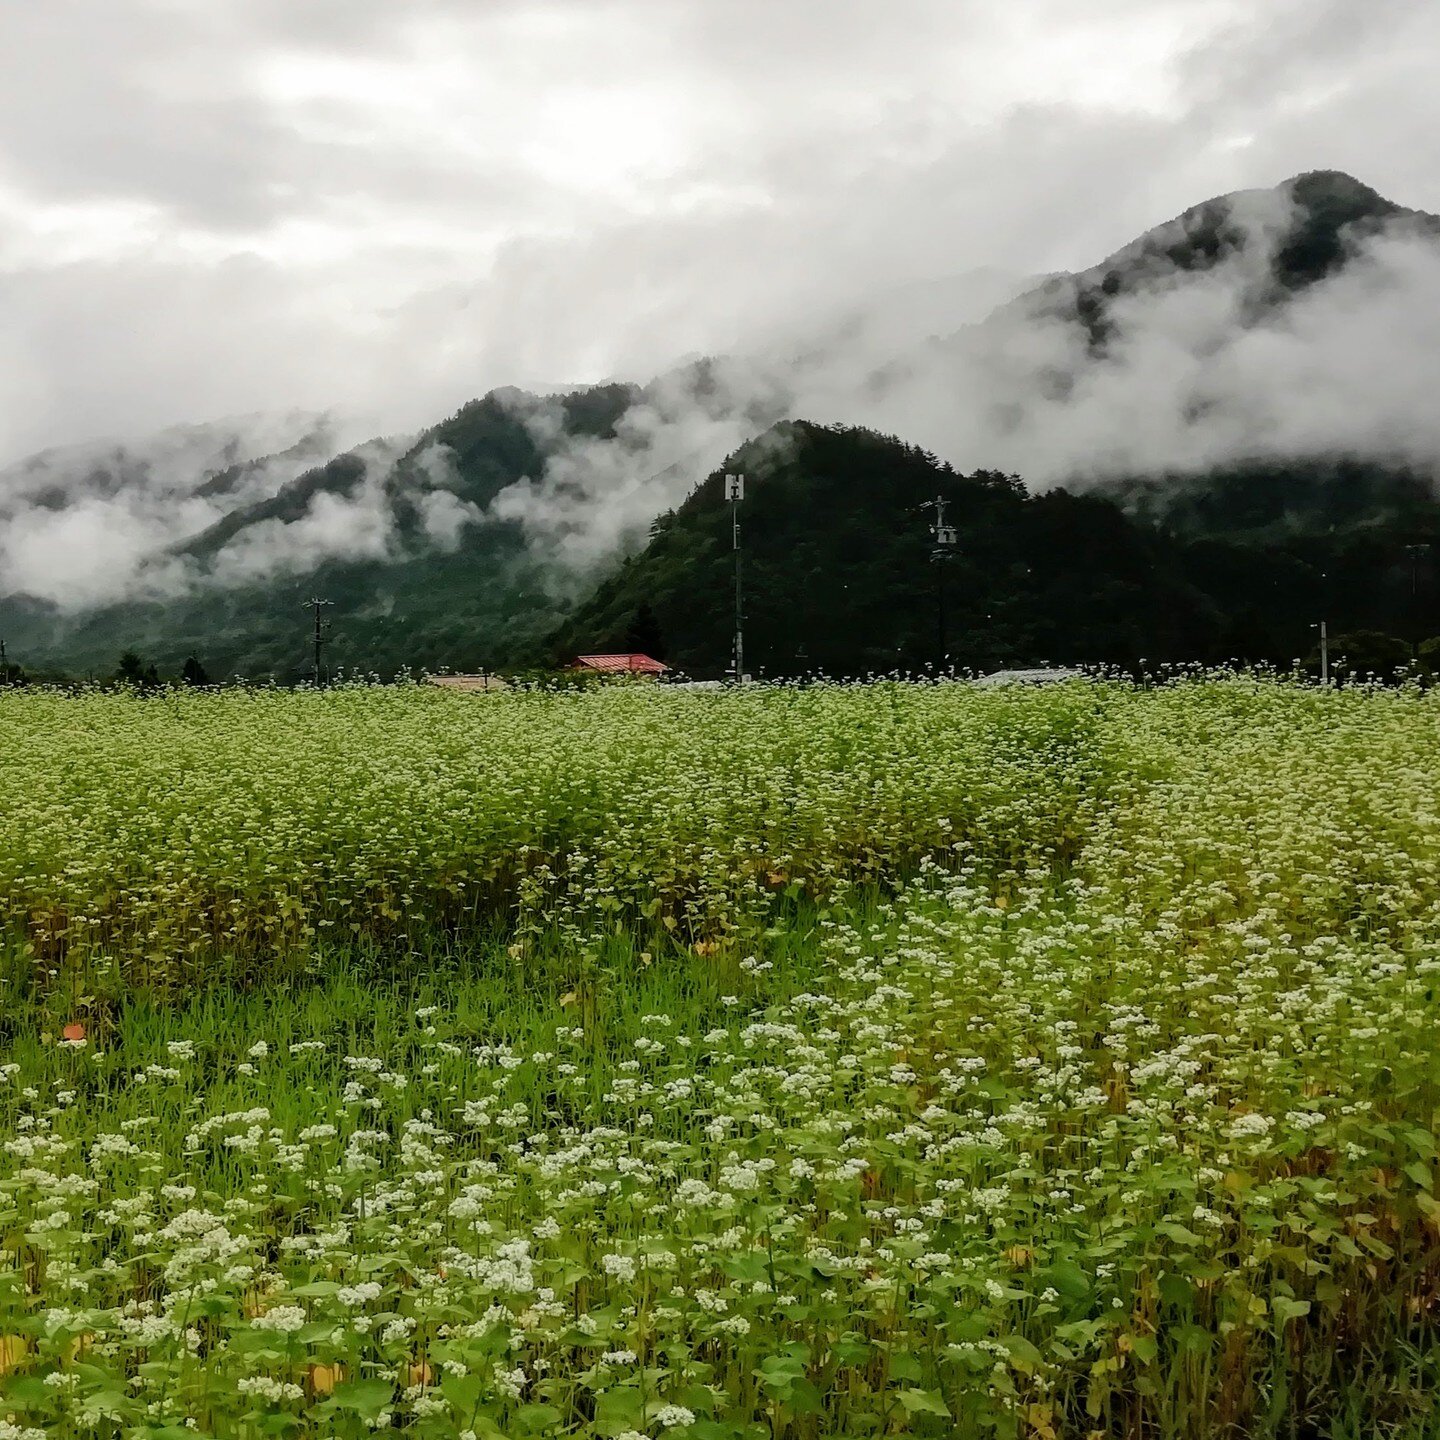 Clouds through the valley
Buckwheat in bloom
Macaques chatter beyond the fields

#王滝村 #御嶽山 #木曽 #田舎暮らし #otakivillage #mtontake #kiso #ruraljapan